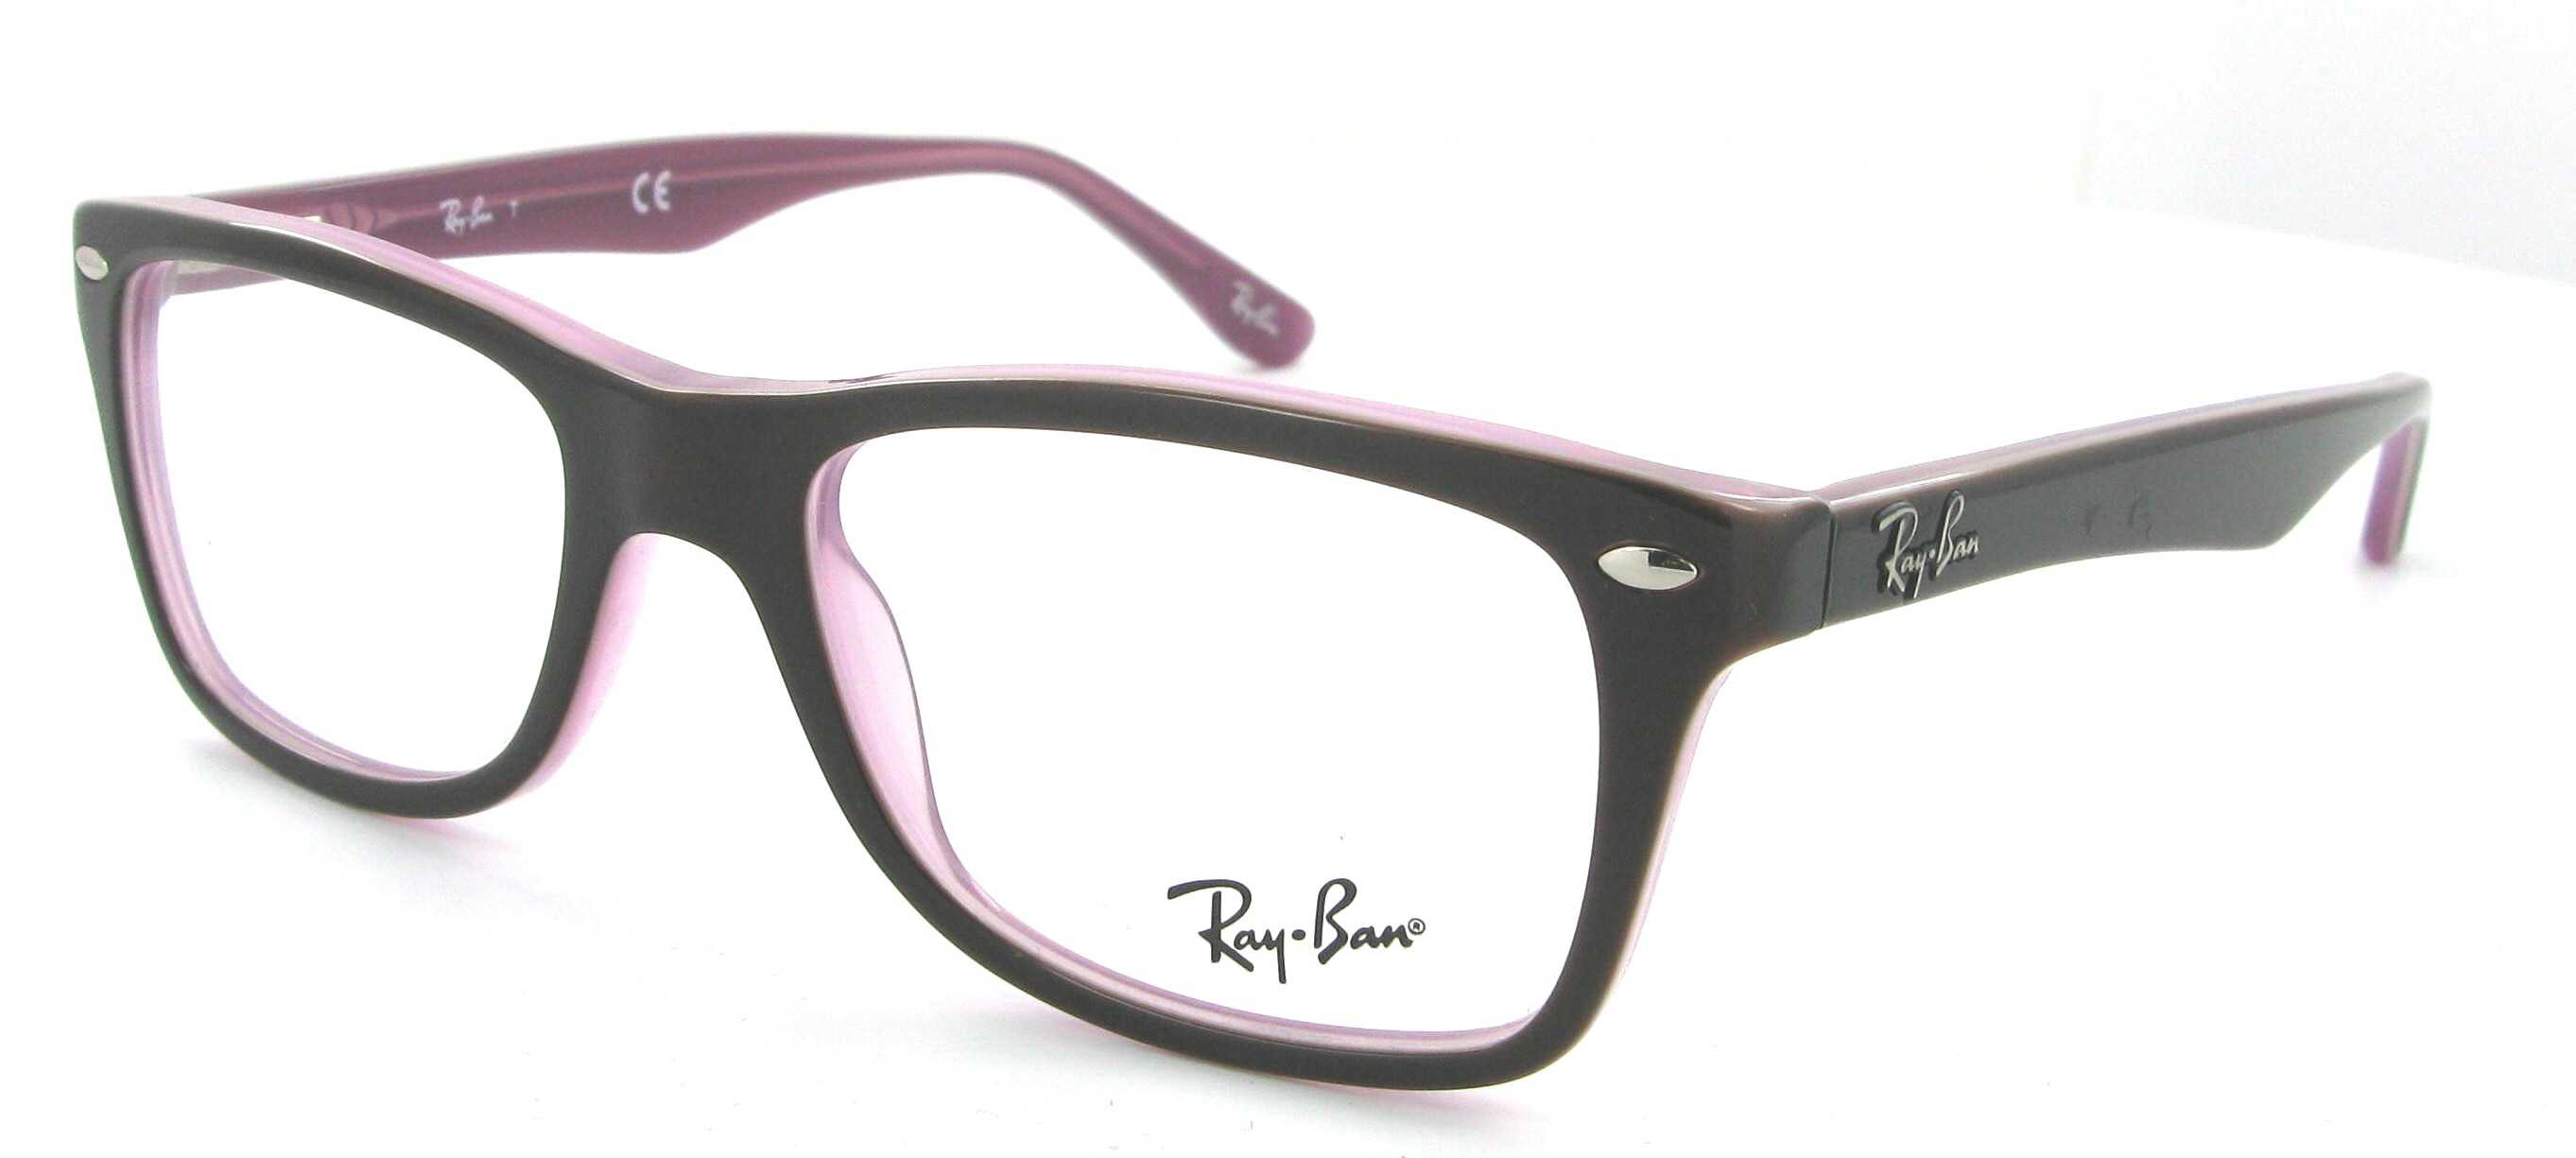 monture ray ban homme vue